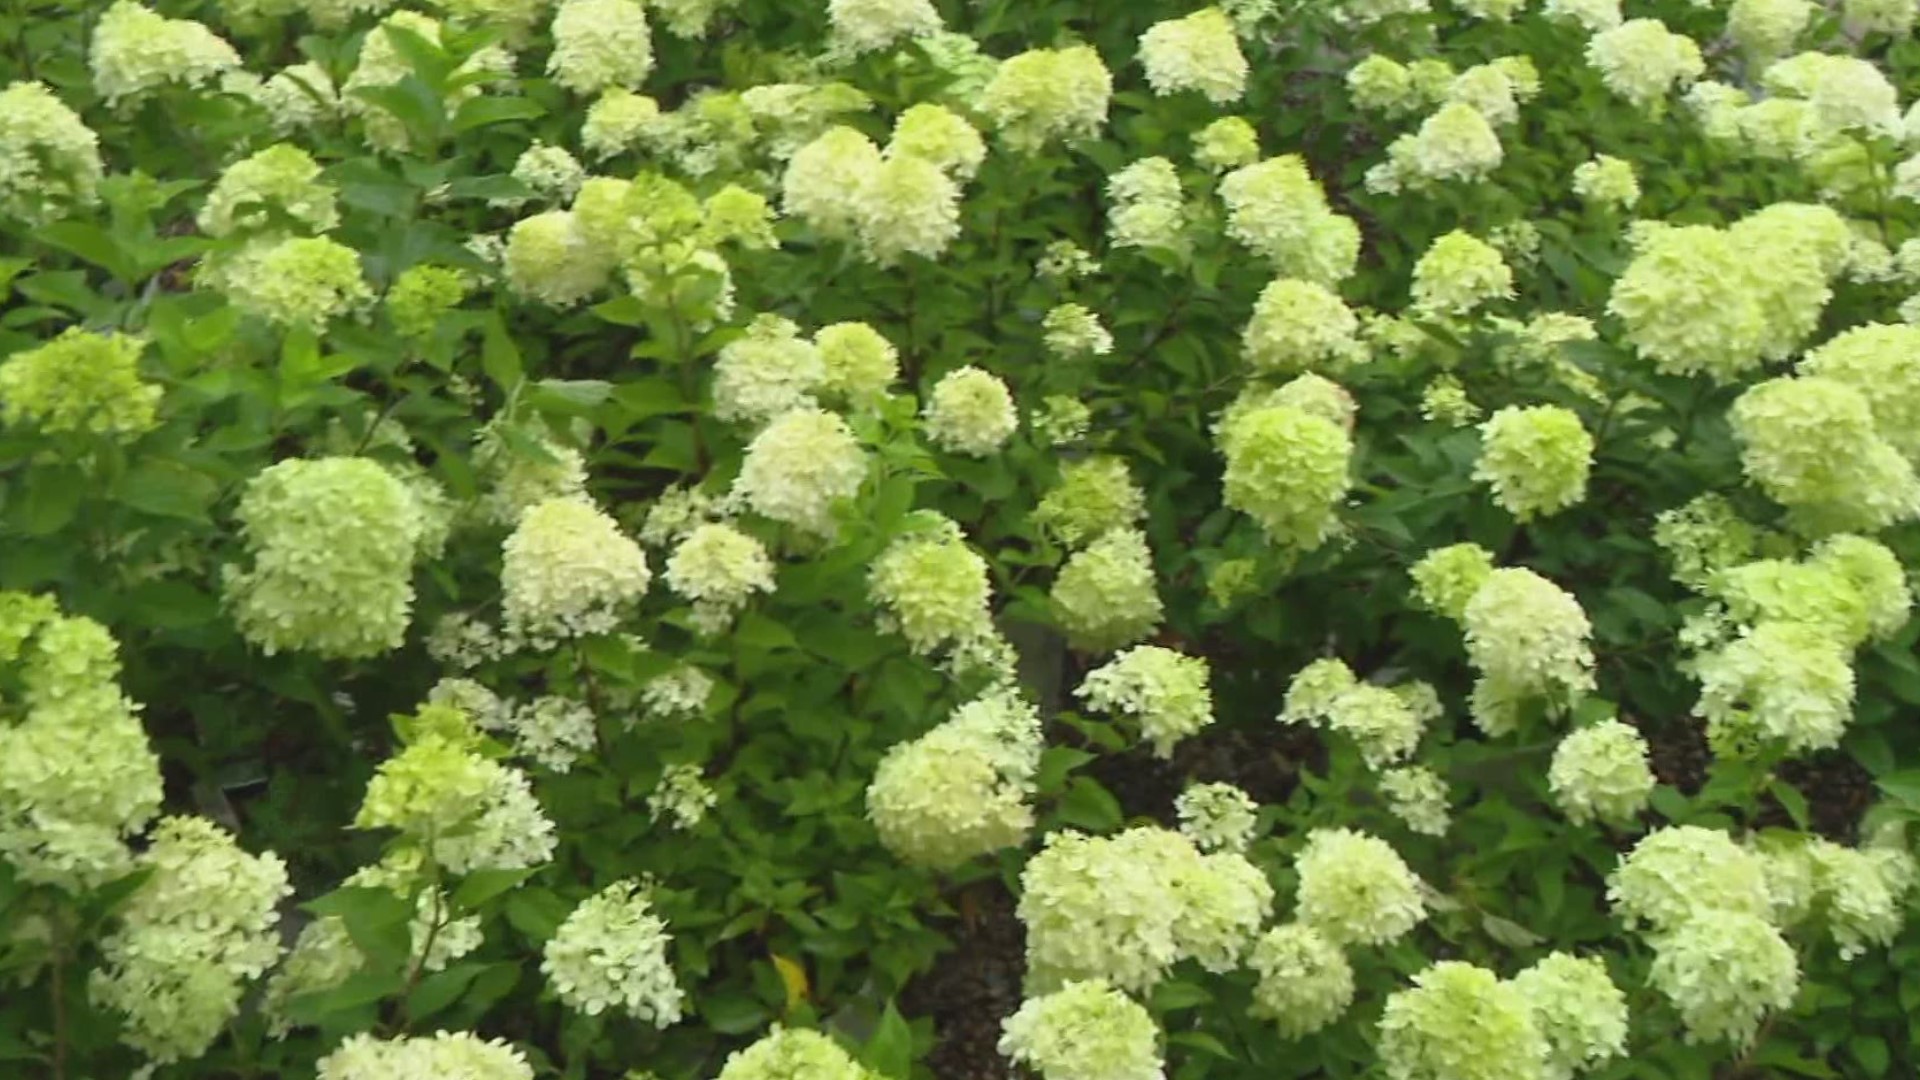 Panicle hydrangeas are versatile and popular landscaping plants. Pat shares common growing and pruning tips.